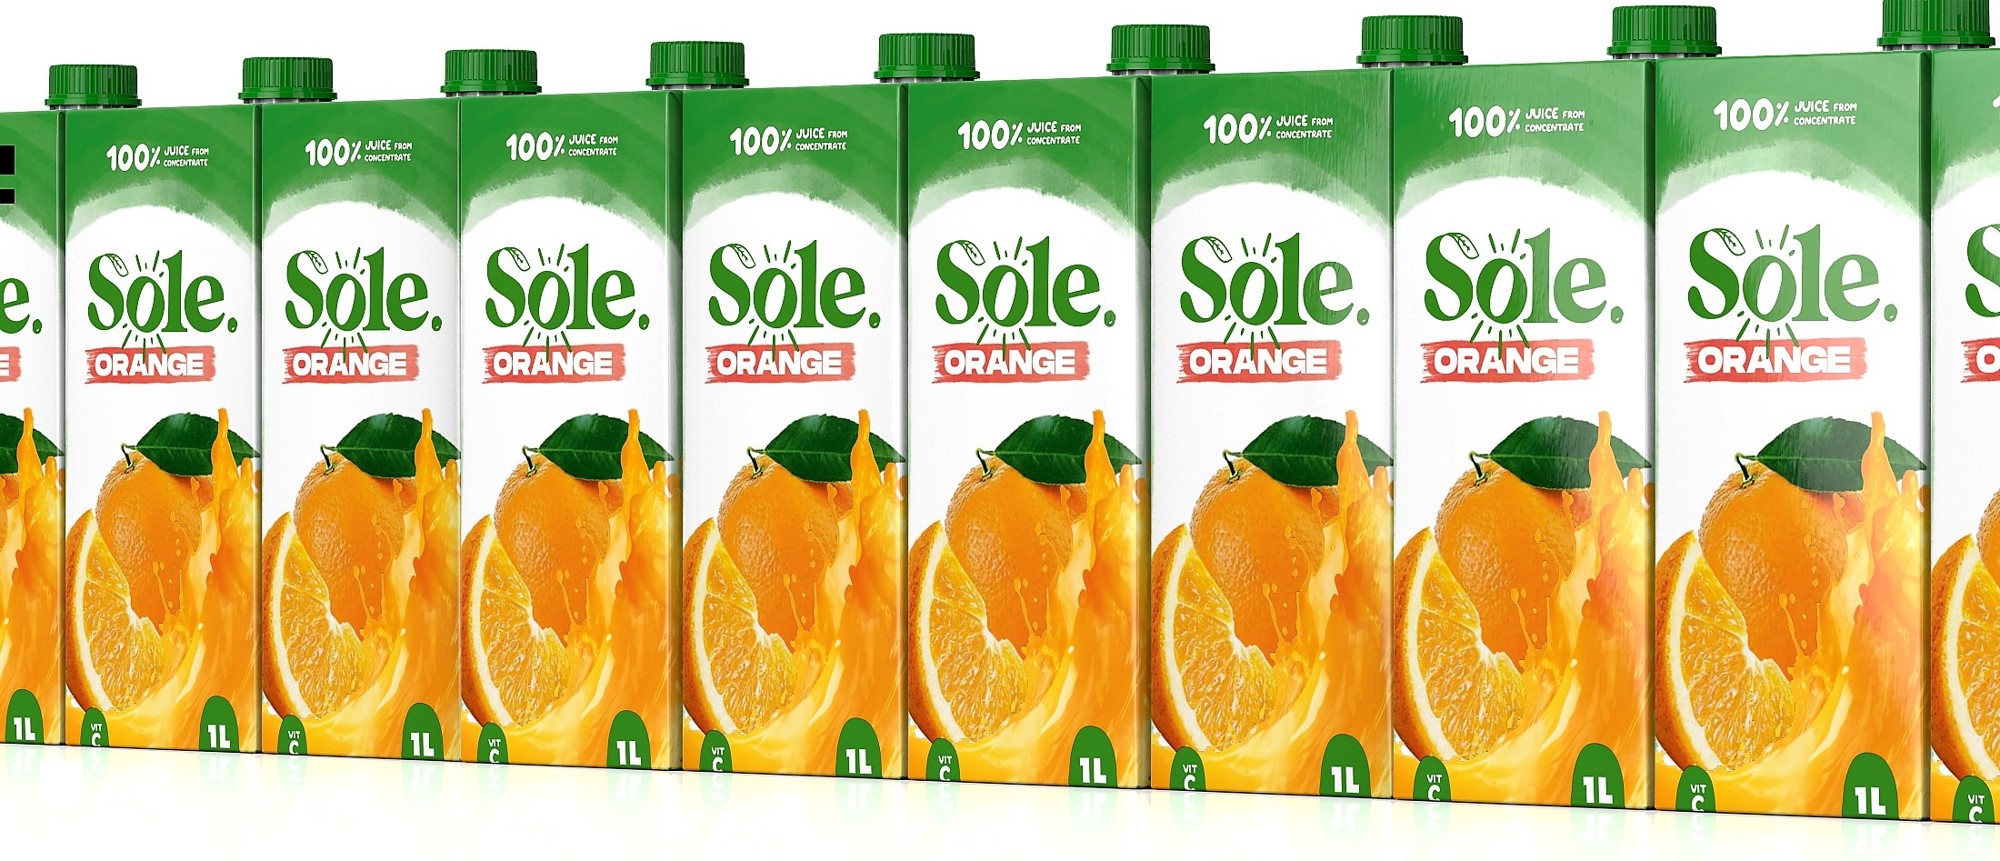 Juice and wine in aseptic carton packaging – the success case of Sole LLC, start-up Liberian company